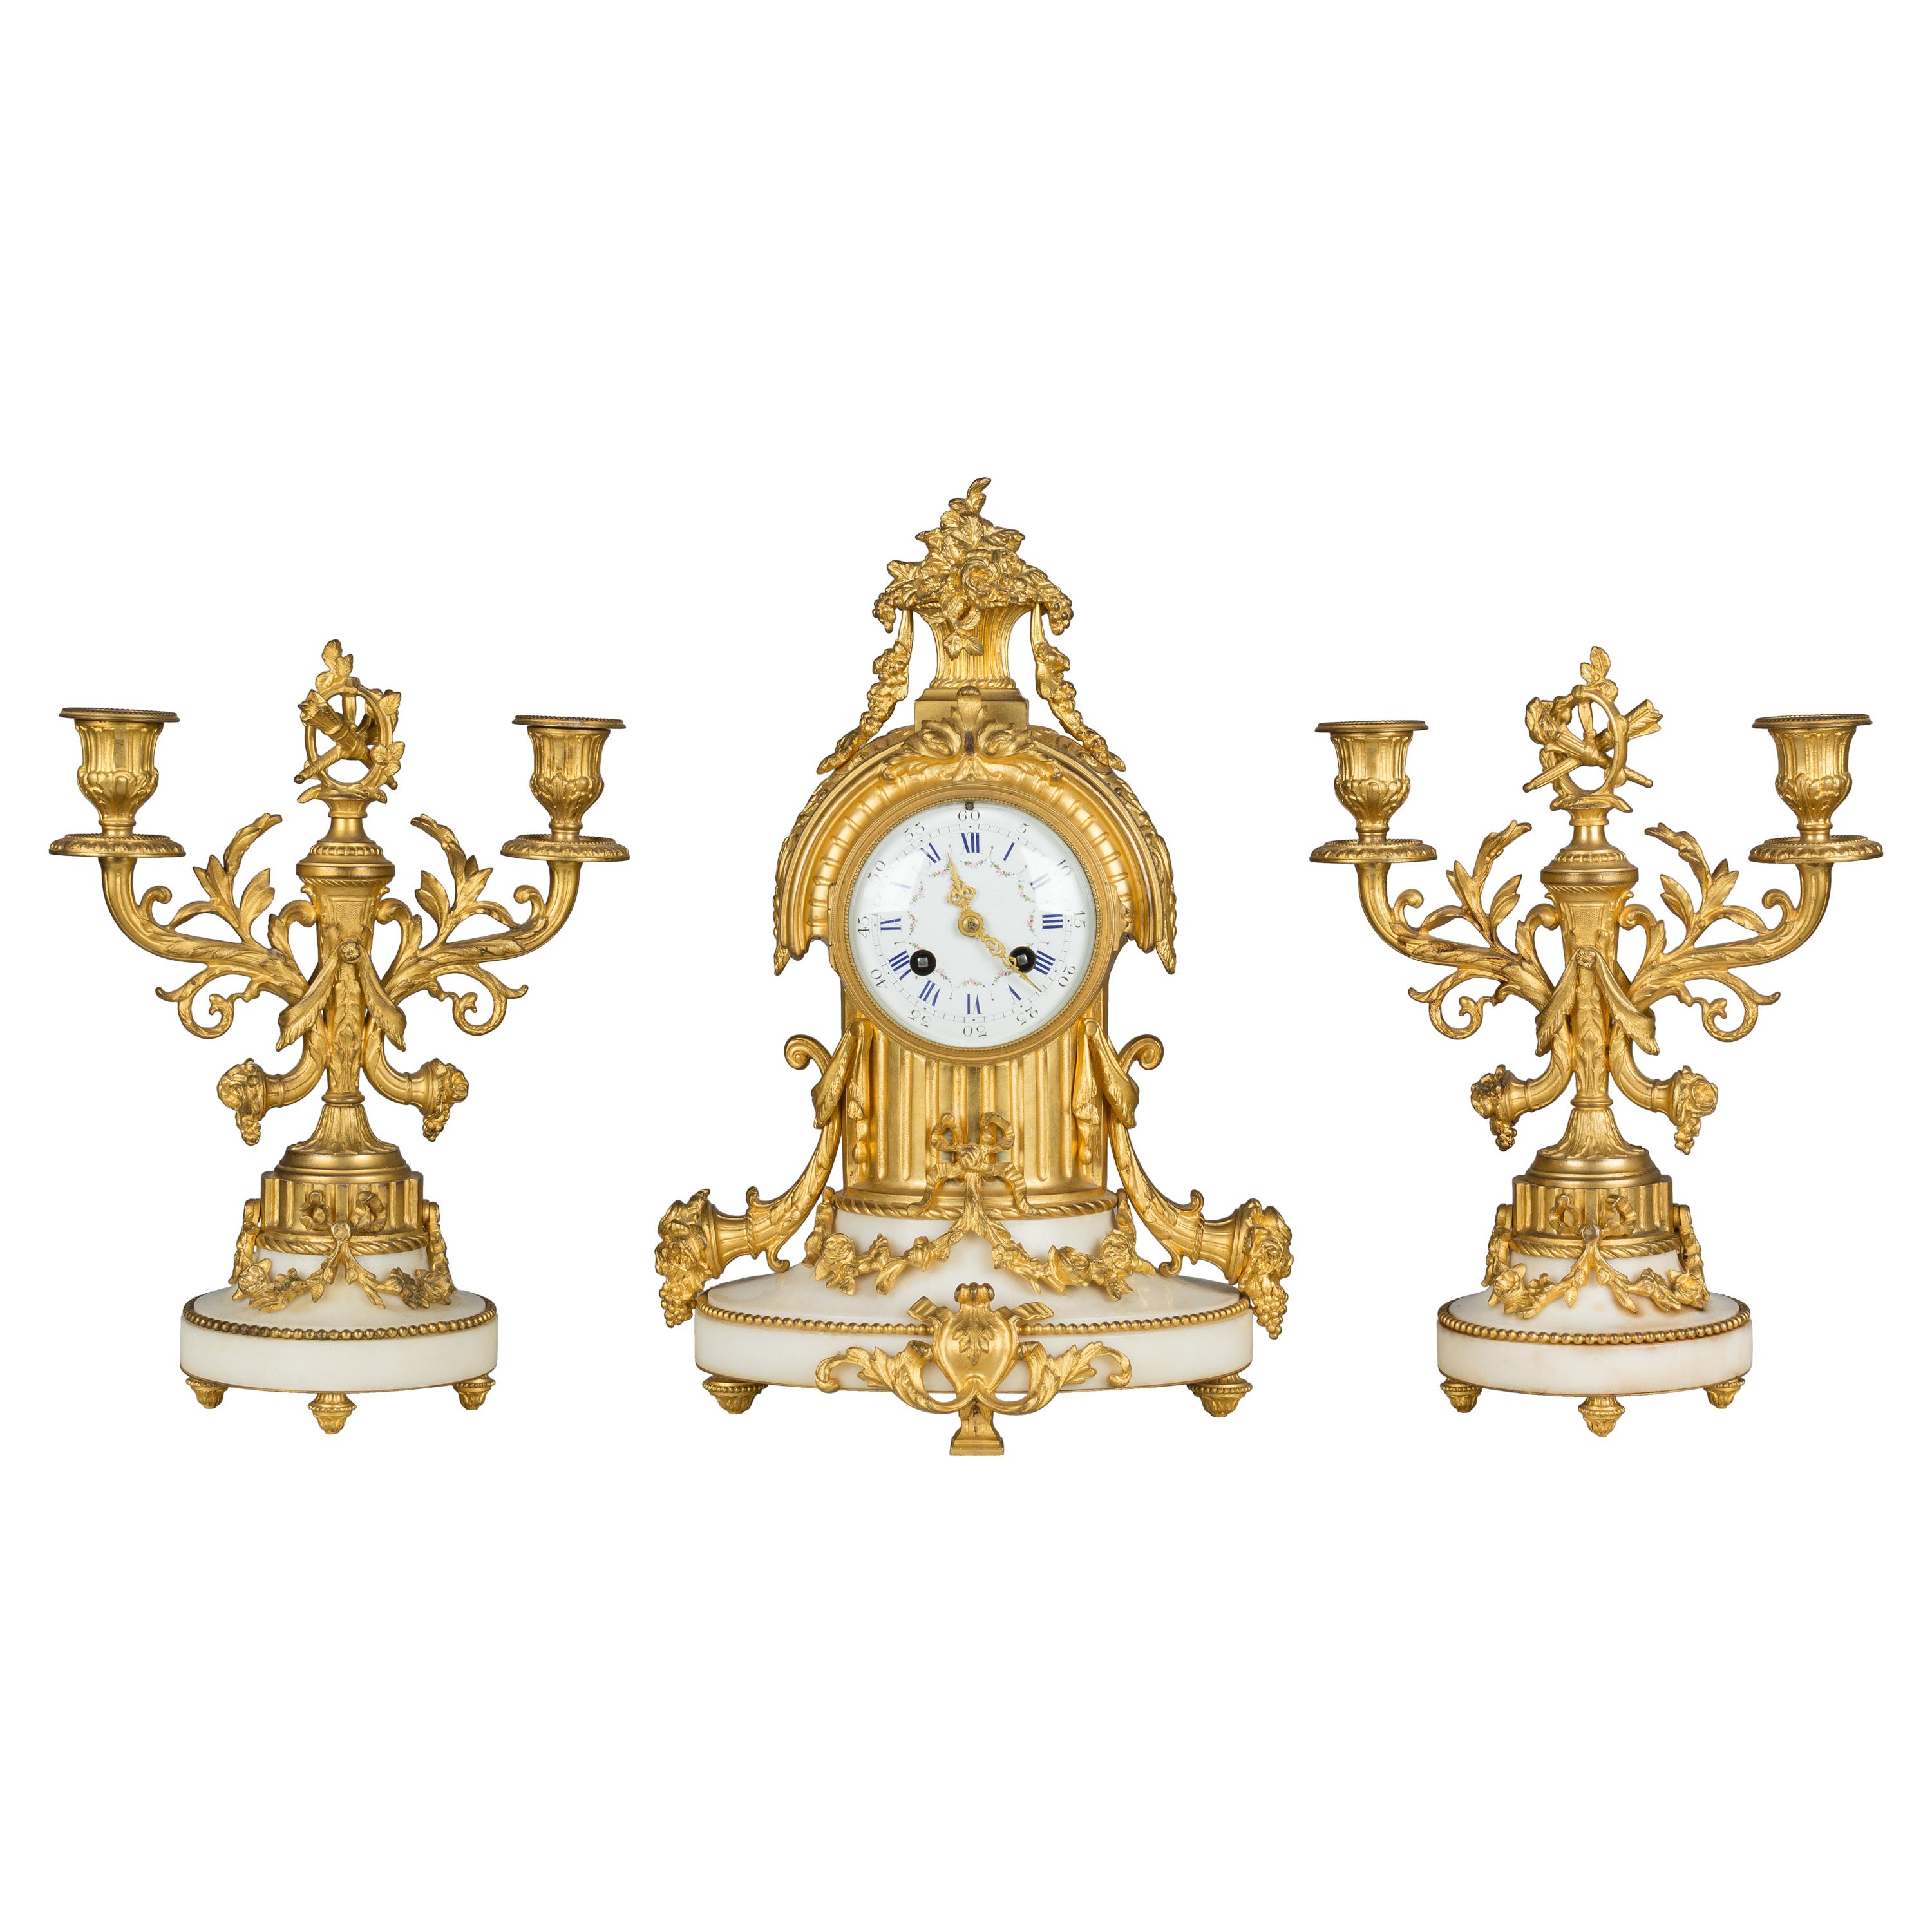 19th Century Louis XVI Style Mantle Clock and Candelabras